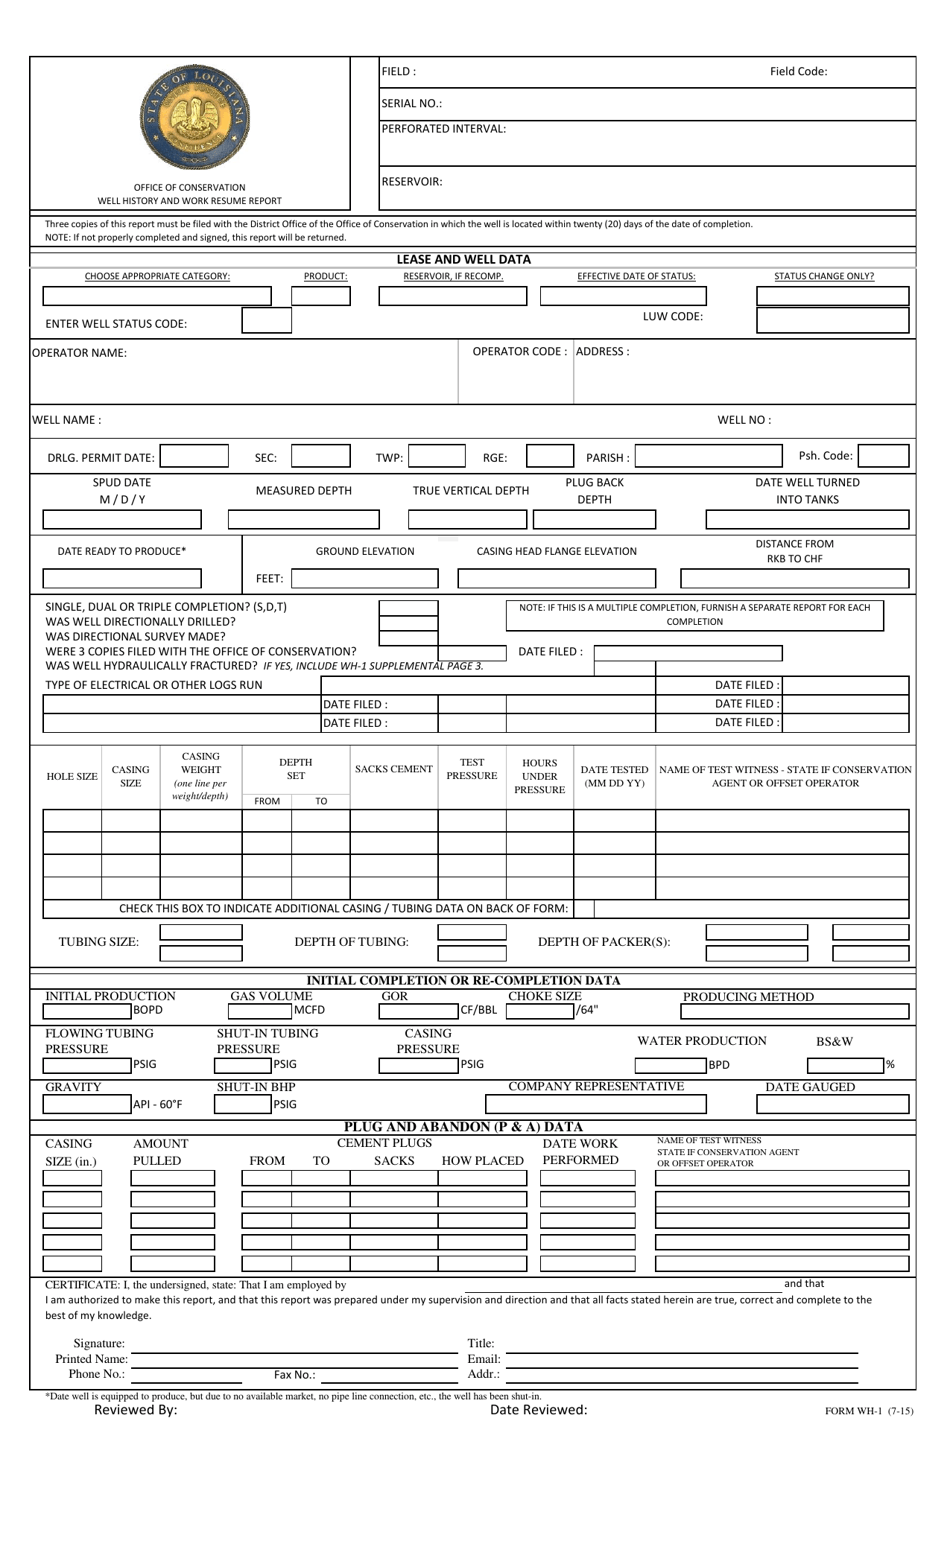 Form WH-1 Well History and Work Resume Report - Louisiana, Page 1